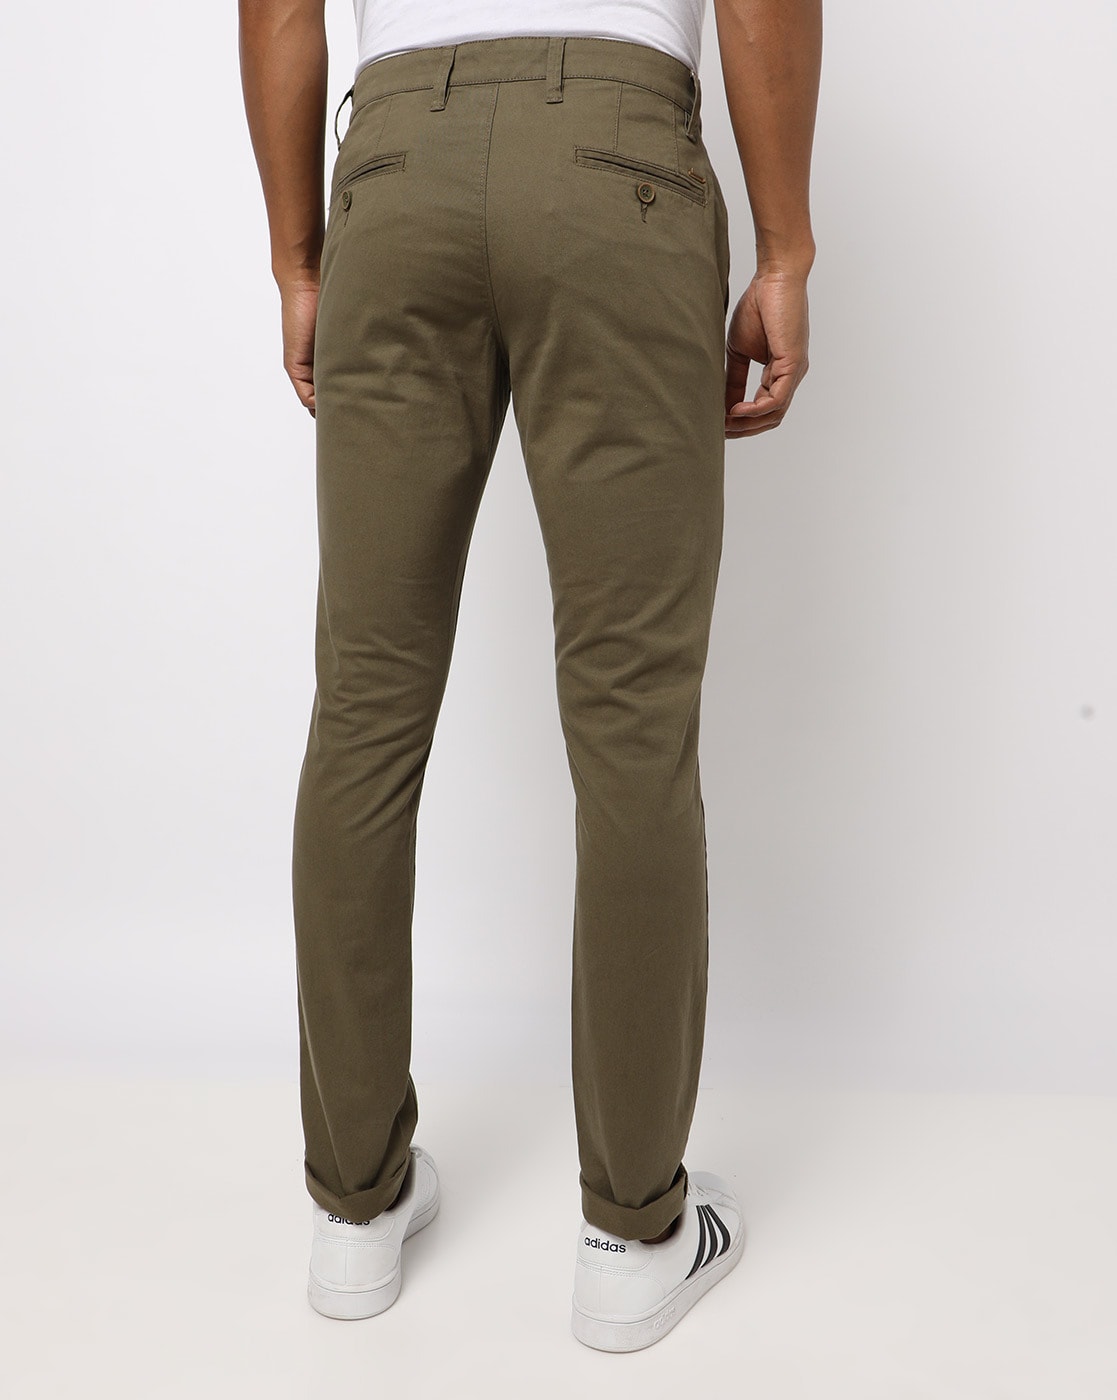 Tops To Go With Olive Green Trousers For Men | International Society of  Precision Agriculture